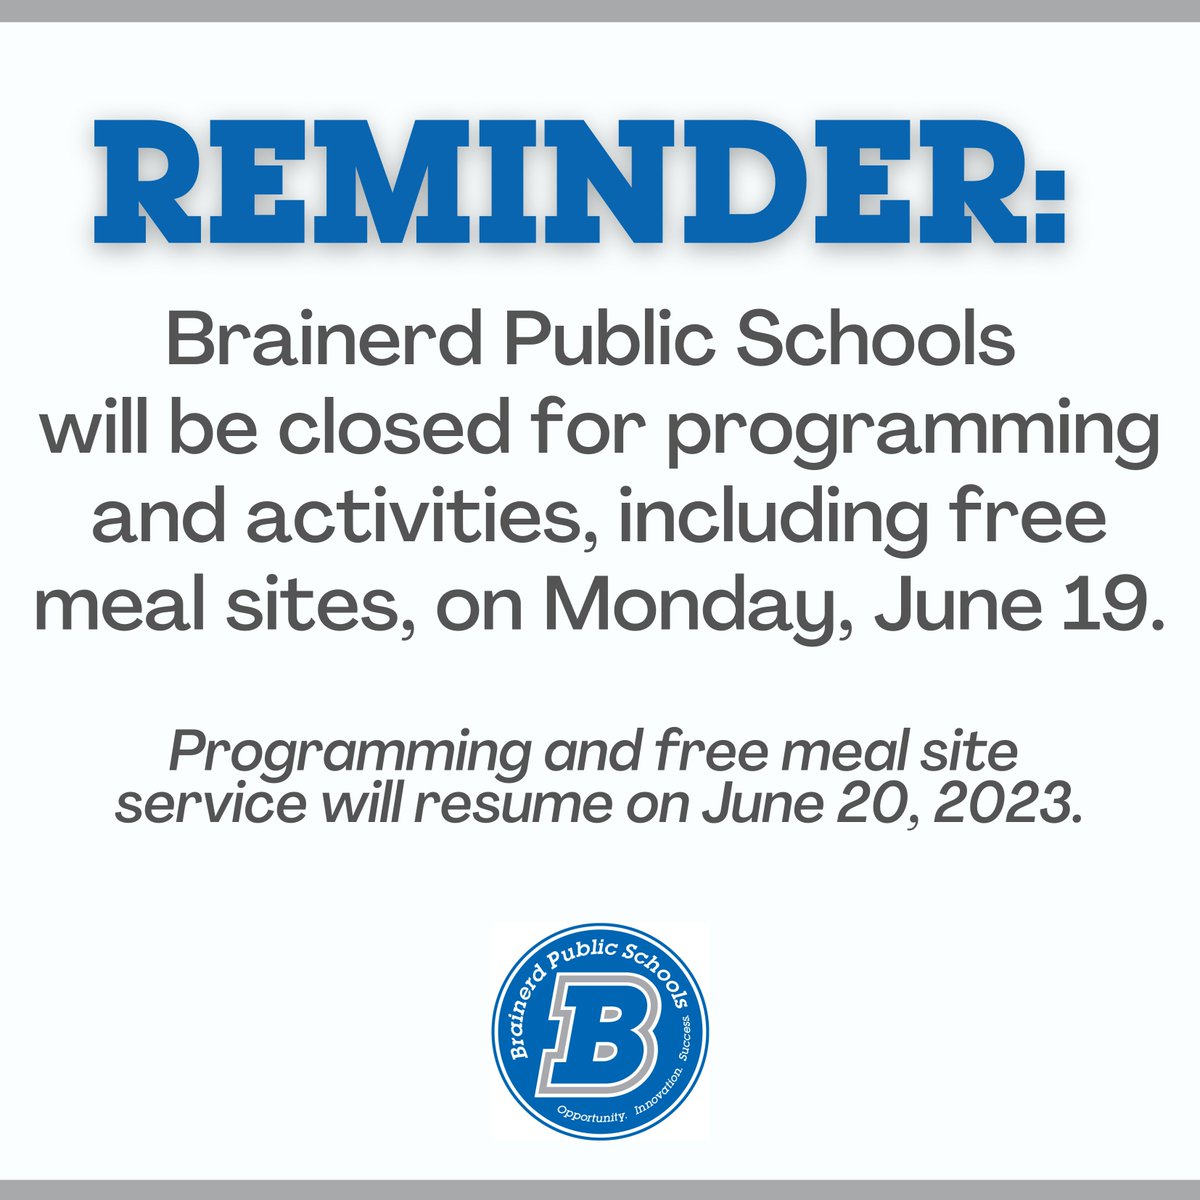 Programming, activities and free meal site service will resume on June 20, 2023.